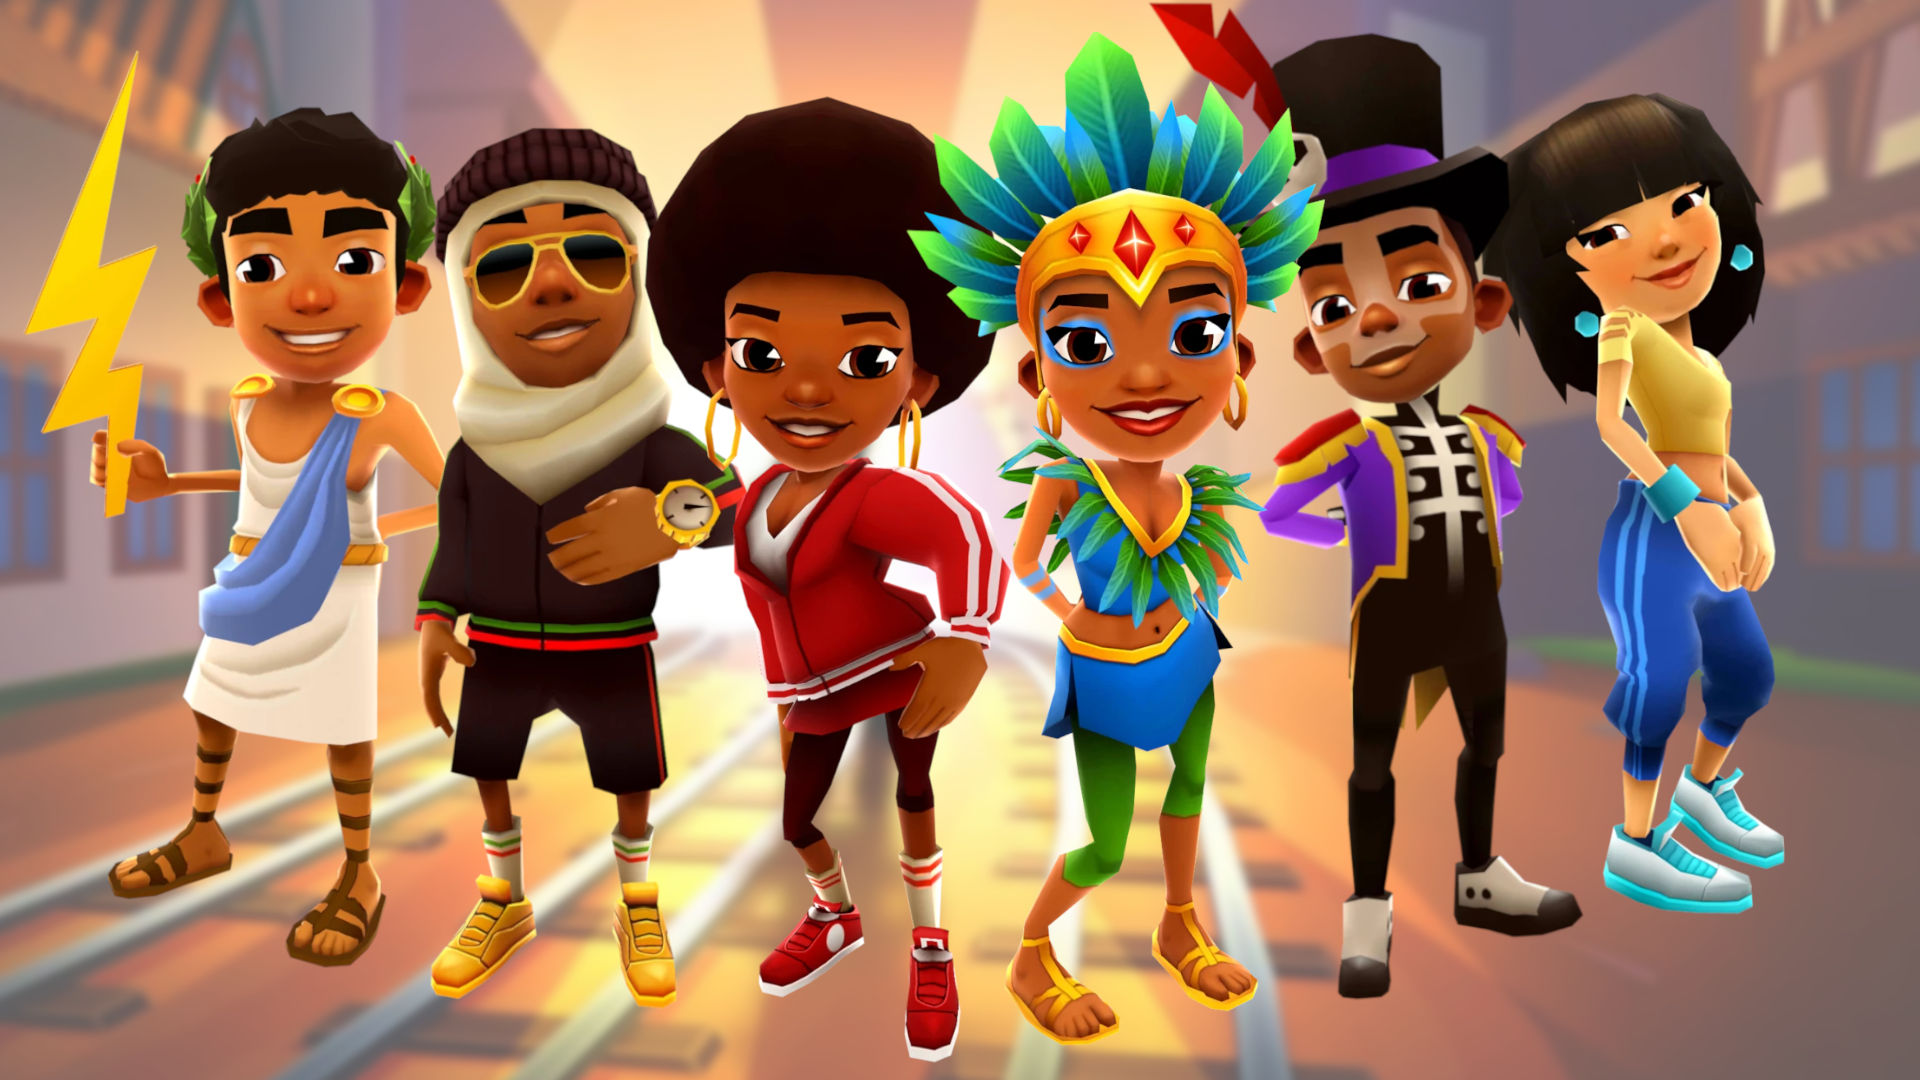 Subway Surfers - New Characters, Locations, Items, and More